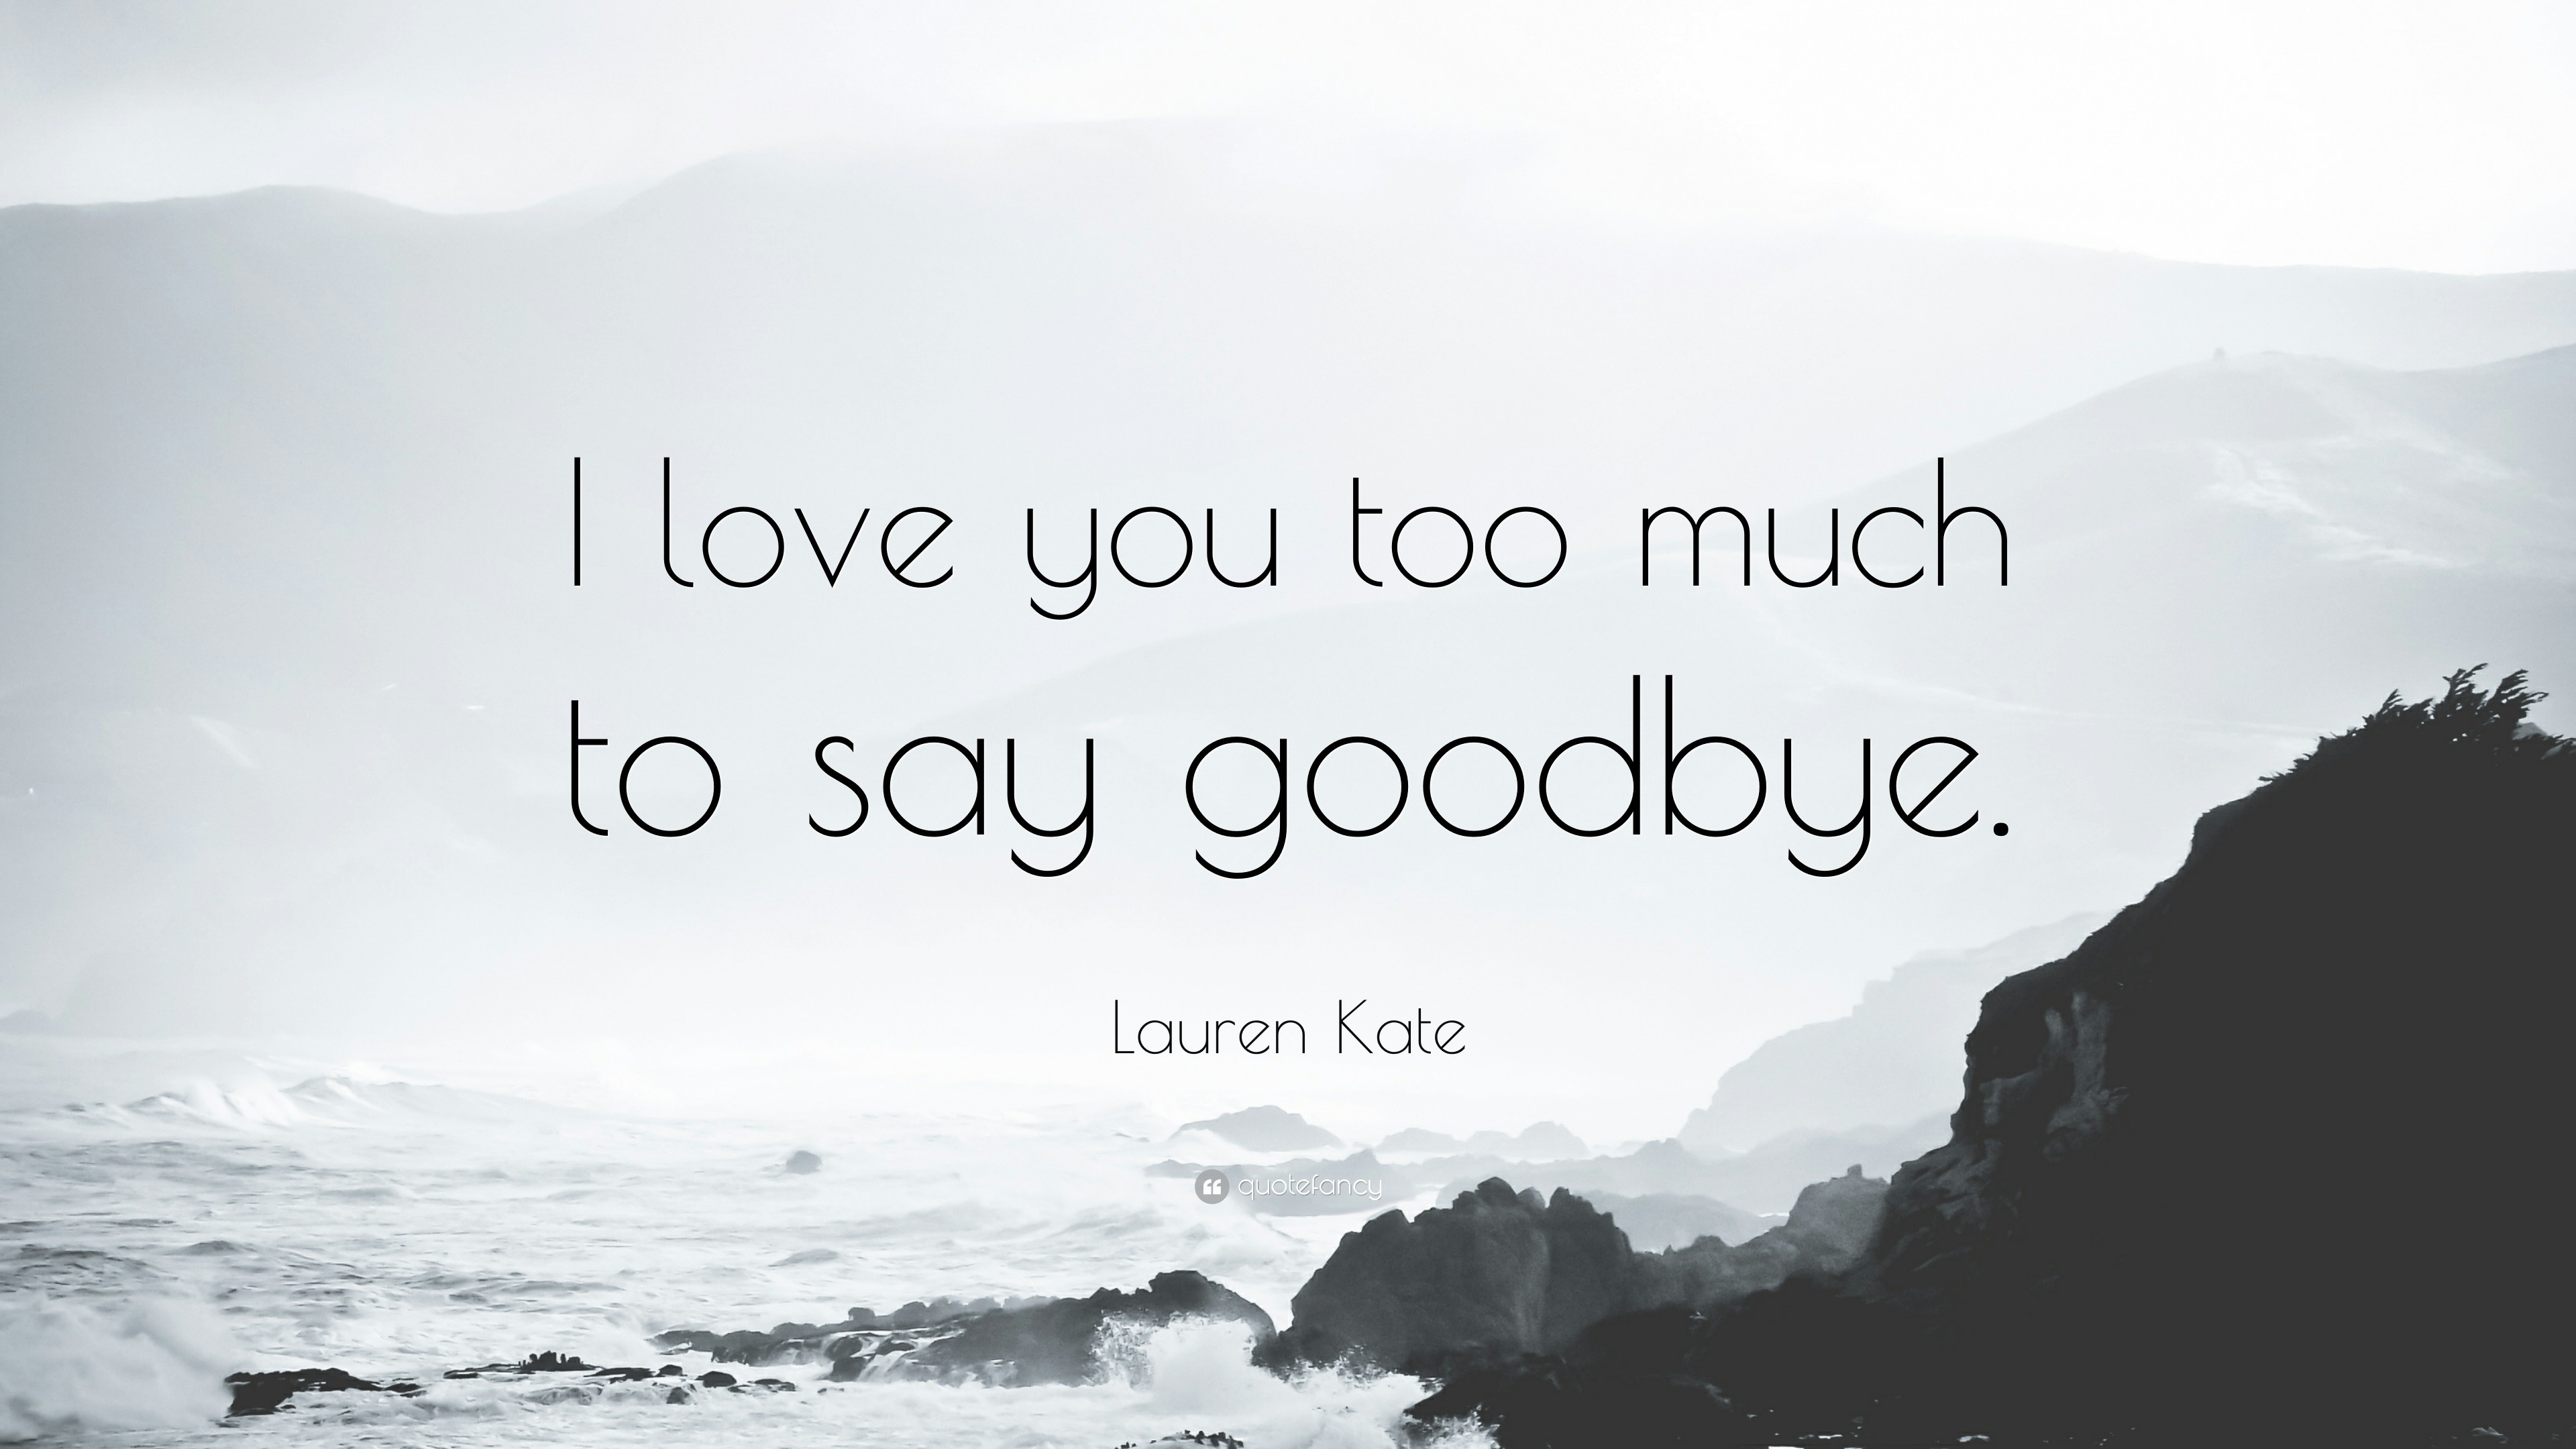 Lauren Kate Quote “I love you too much to say goodbye ”